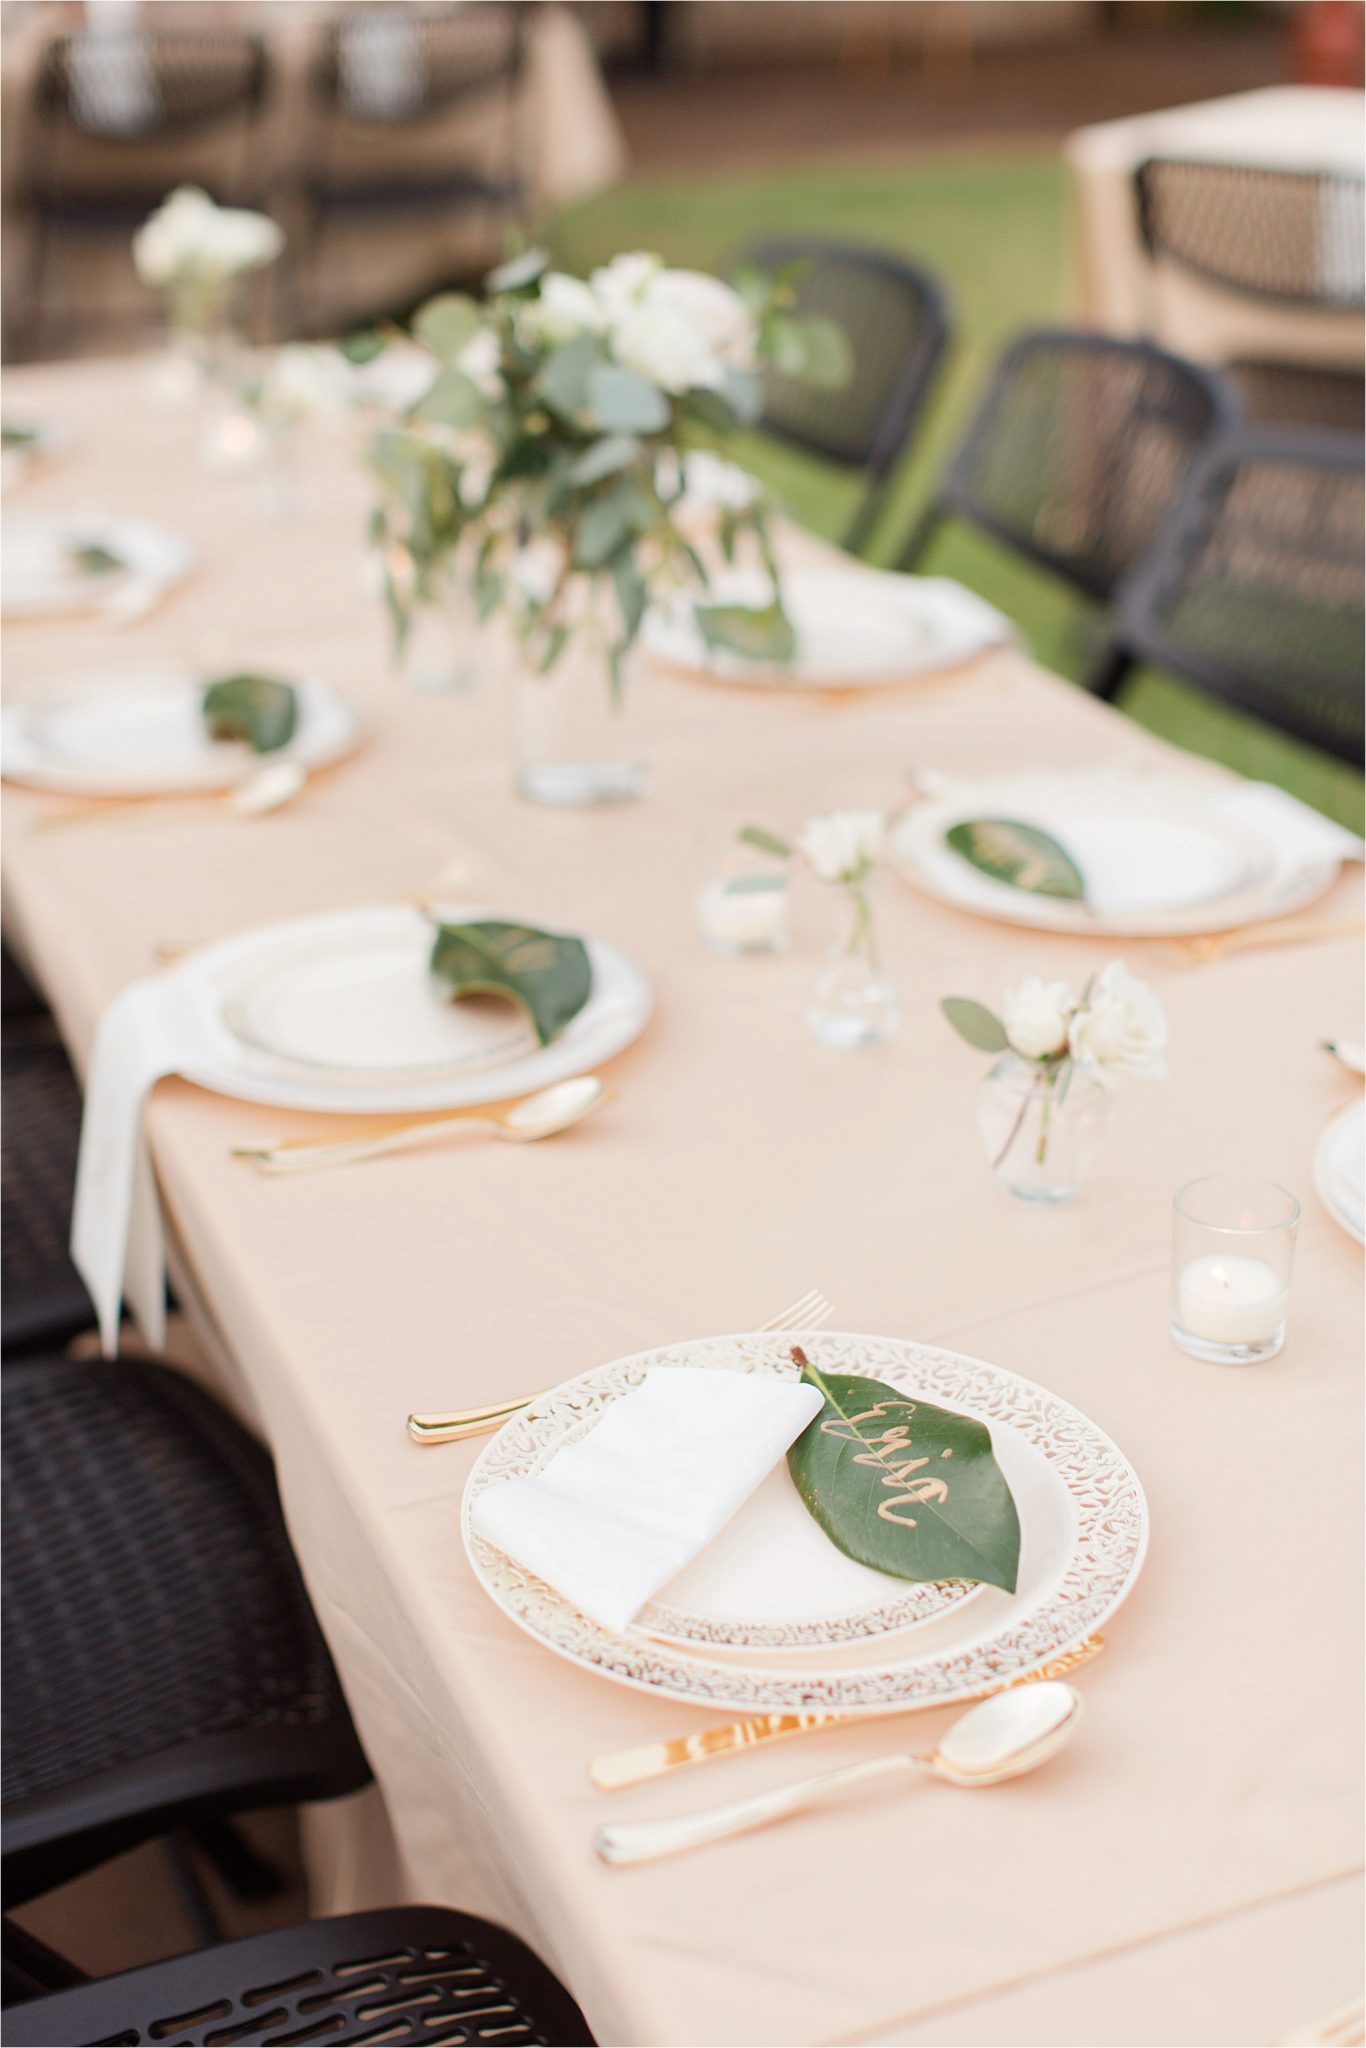 wedding-reception-place-setting-groom-champagne-blushes-nuetrals-white-roses-magnolia-leaves-gold-writing